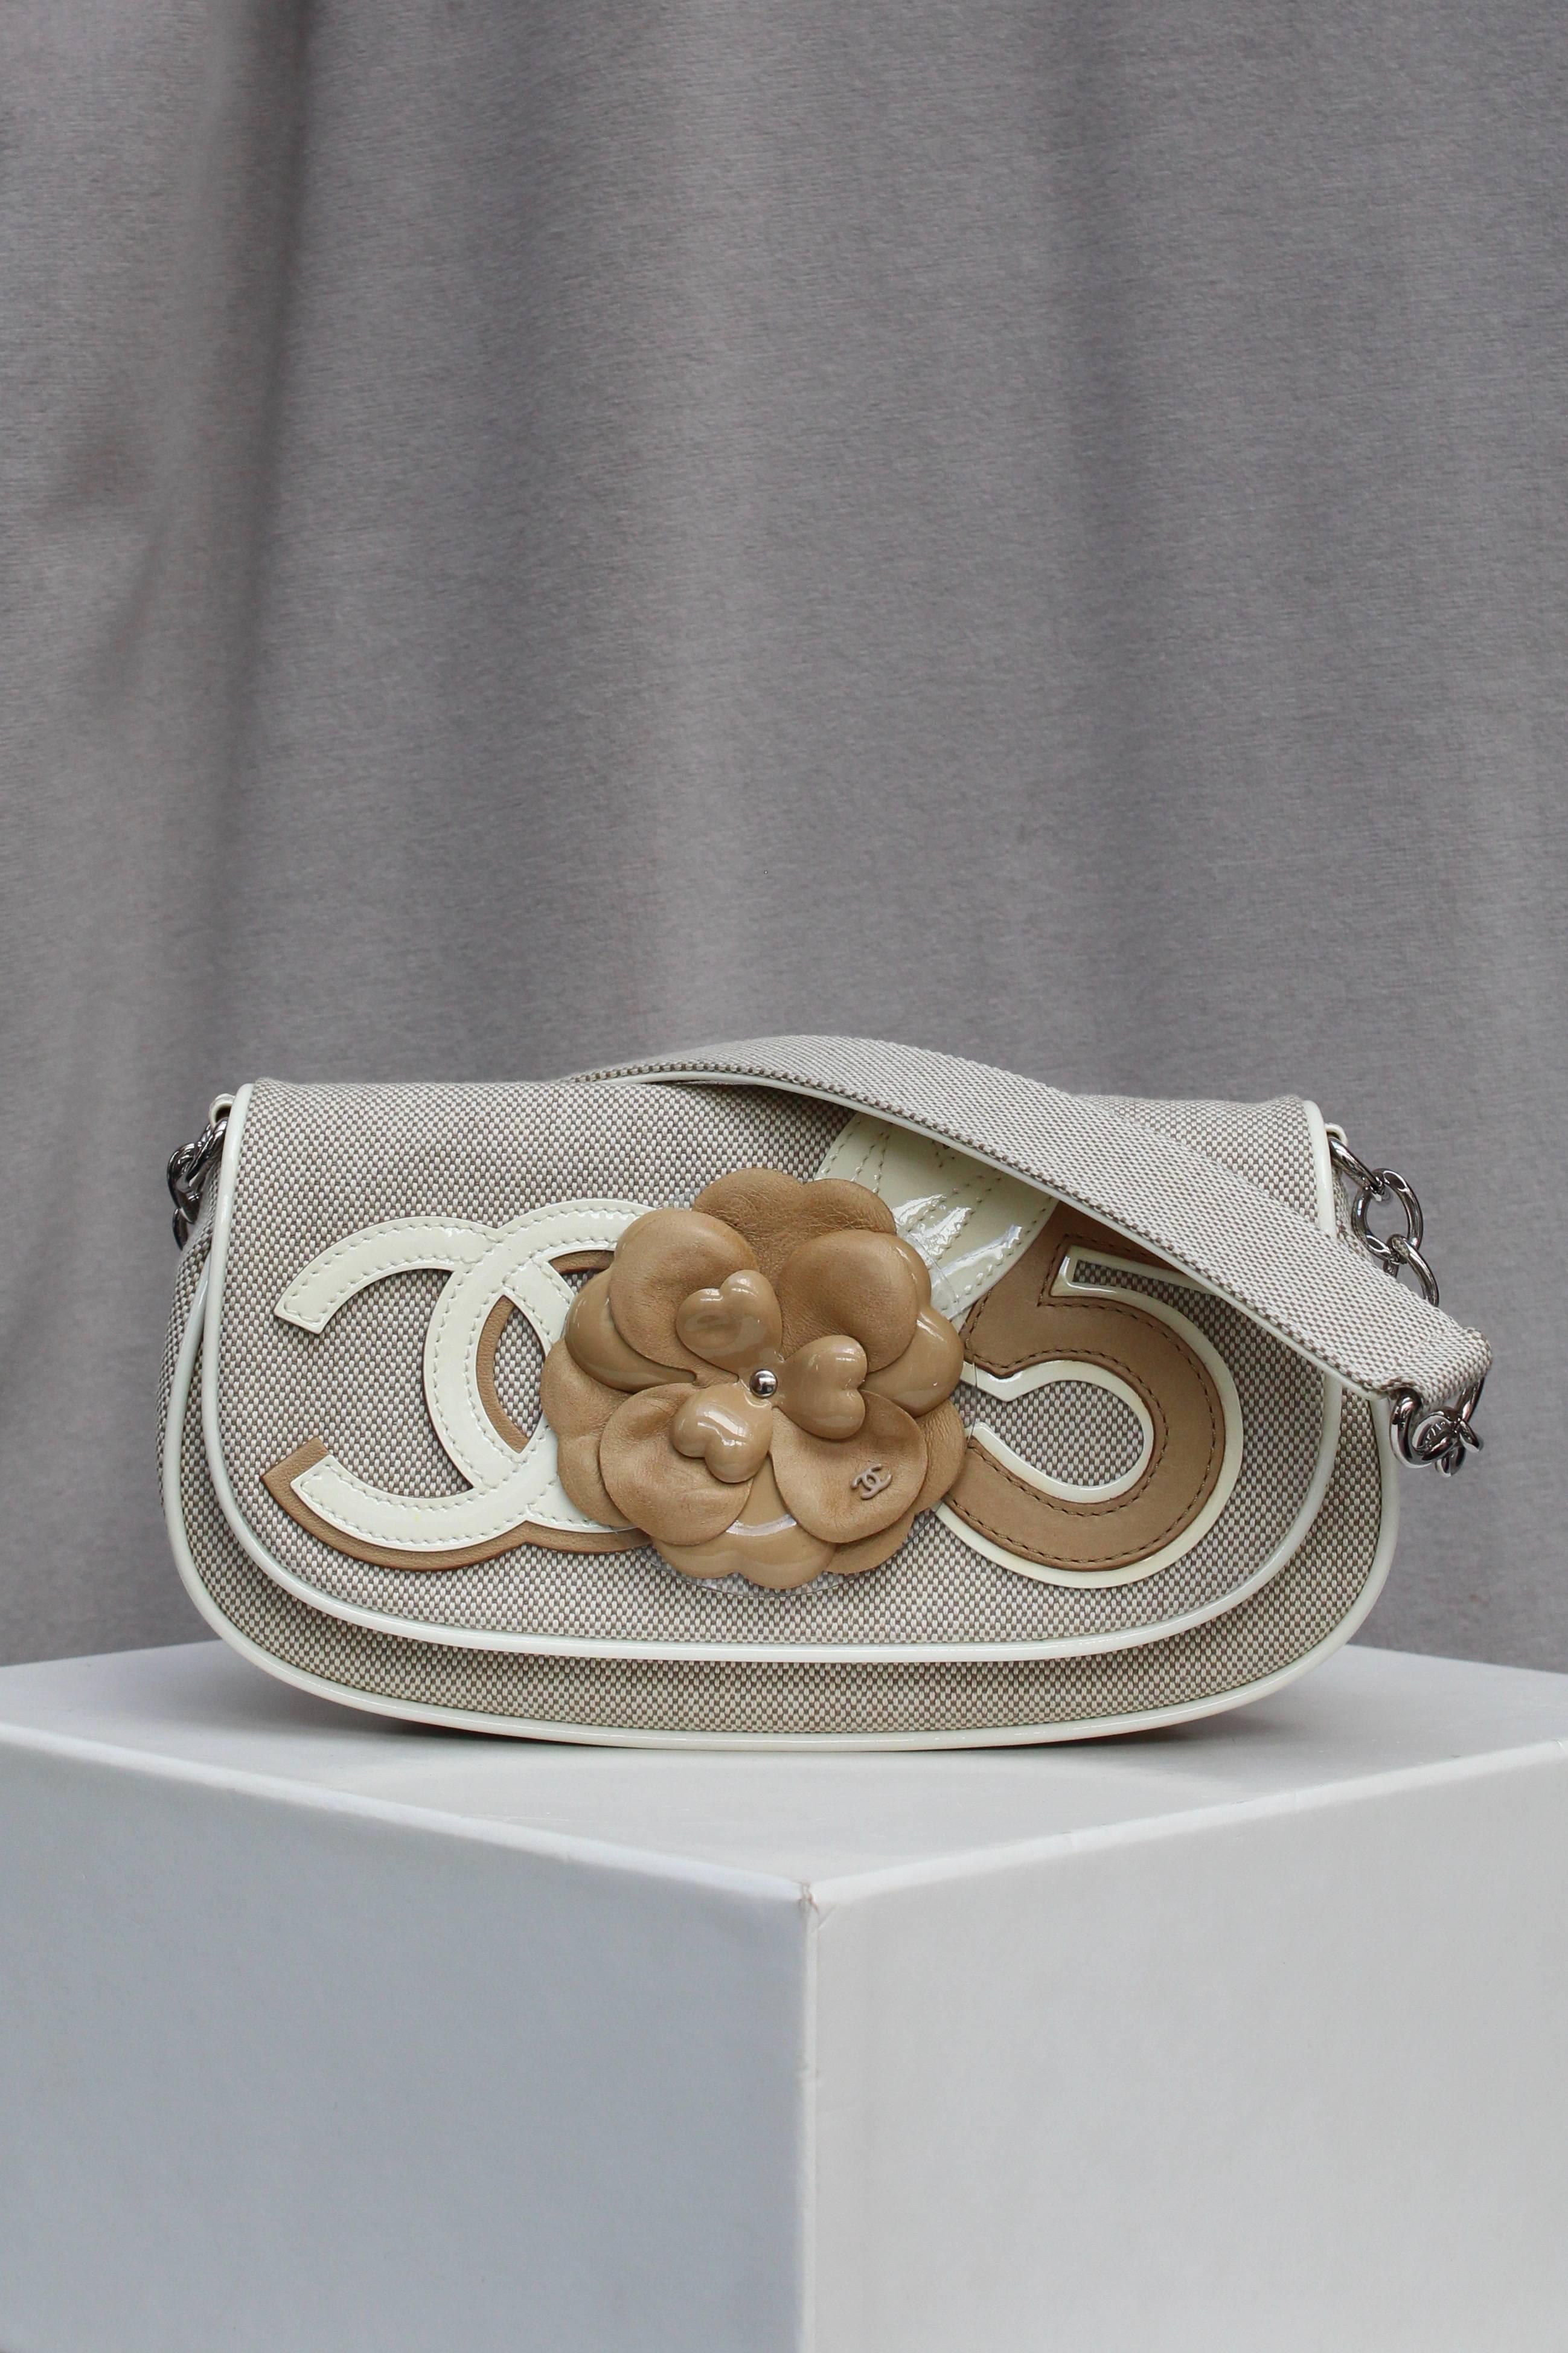 CHANEL (Made in Italy) Baguette bag made of light brown beige and white leather and canvas. It is decorated with a CC logo, a camellia and a Number 5, the very emblems of the brand. The short handle, made of canvas and calf skin, is extended by a